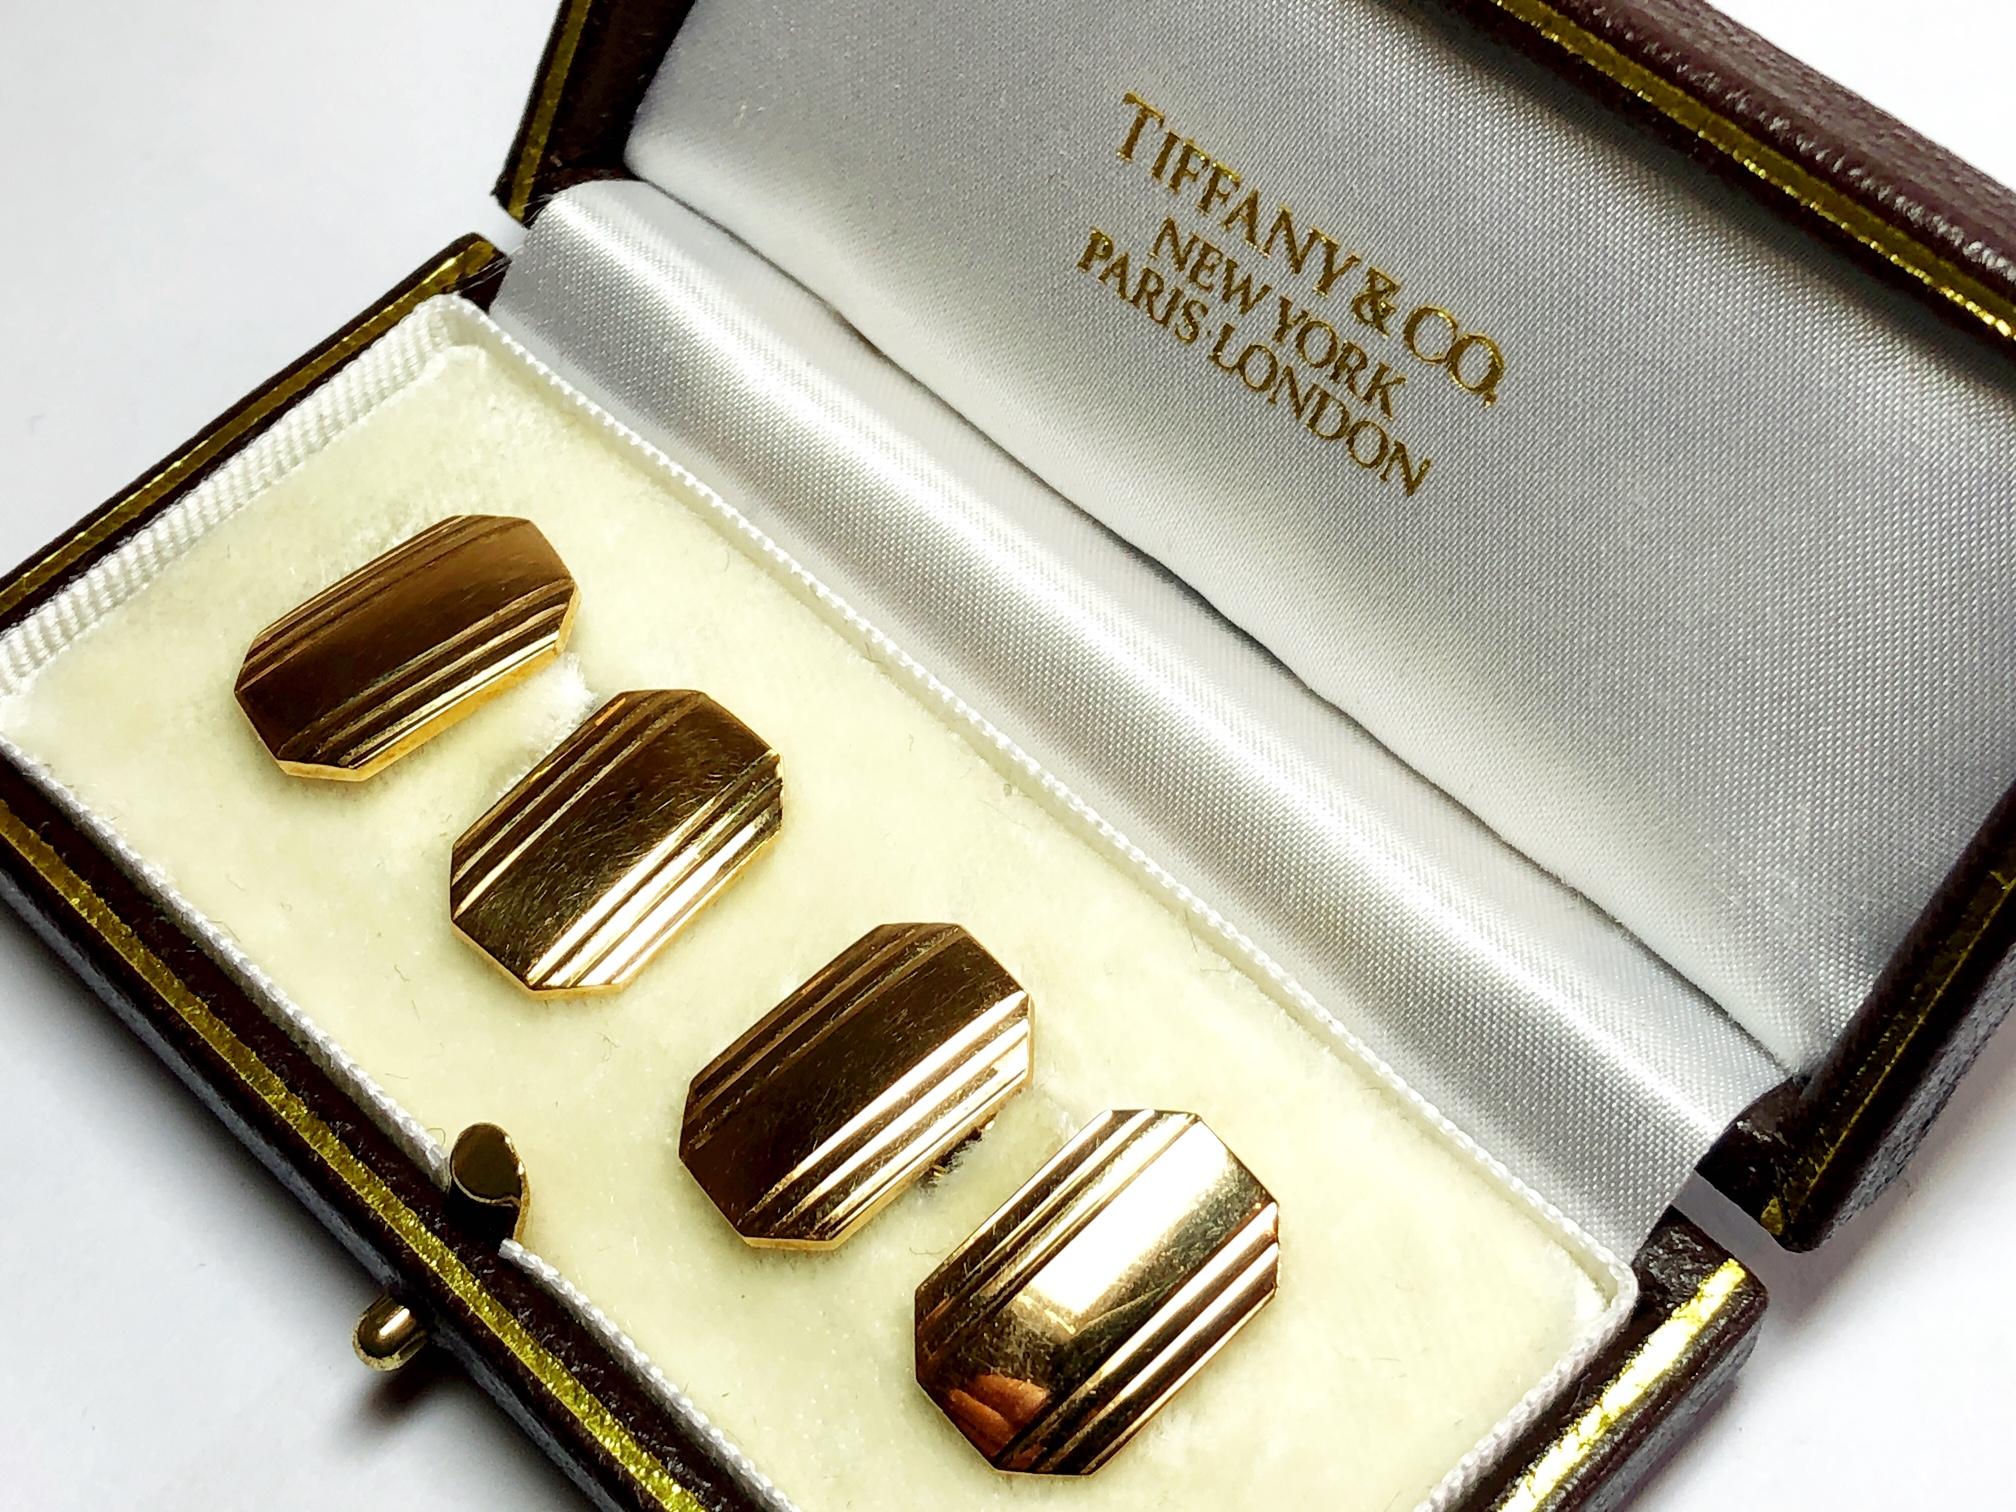 A pair of Tiffany & Co. 14ct gold cufflinks, with a cut cornered rectangle design, with engraved stripes, on  bar links. Marked 14k signed Tiffany circa 1975.